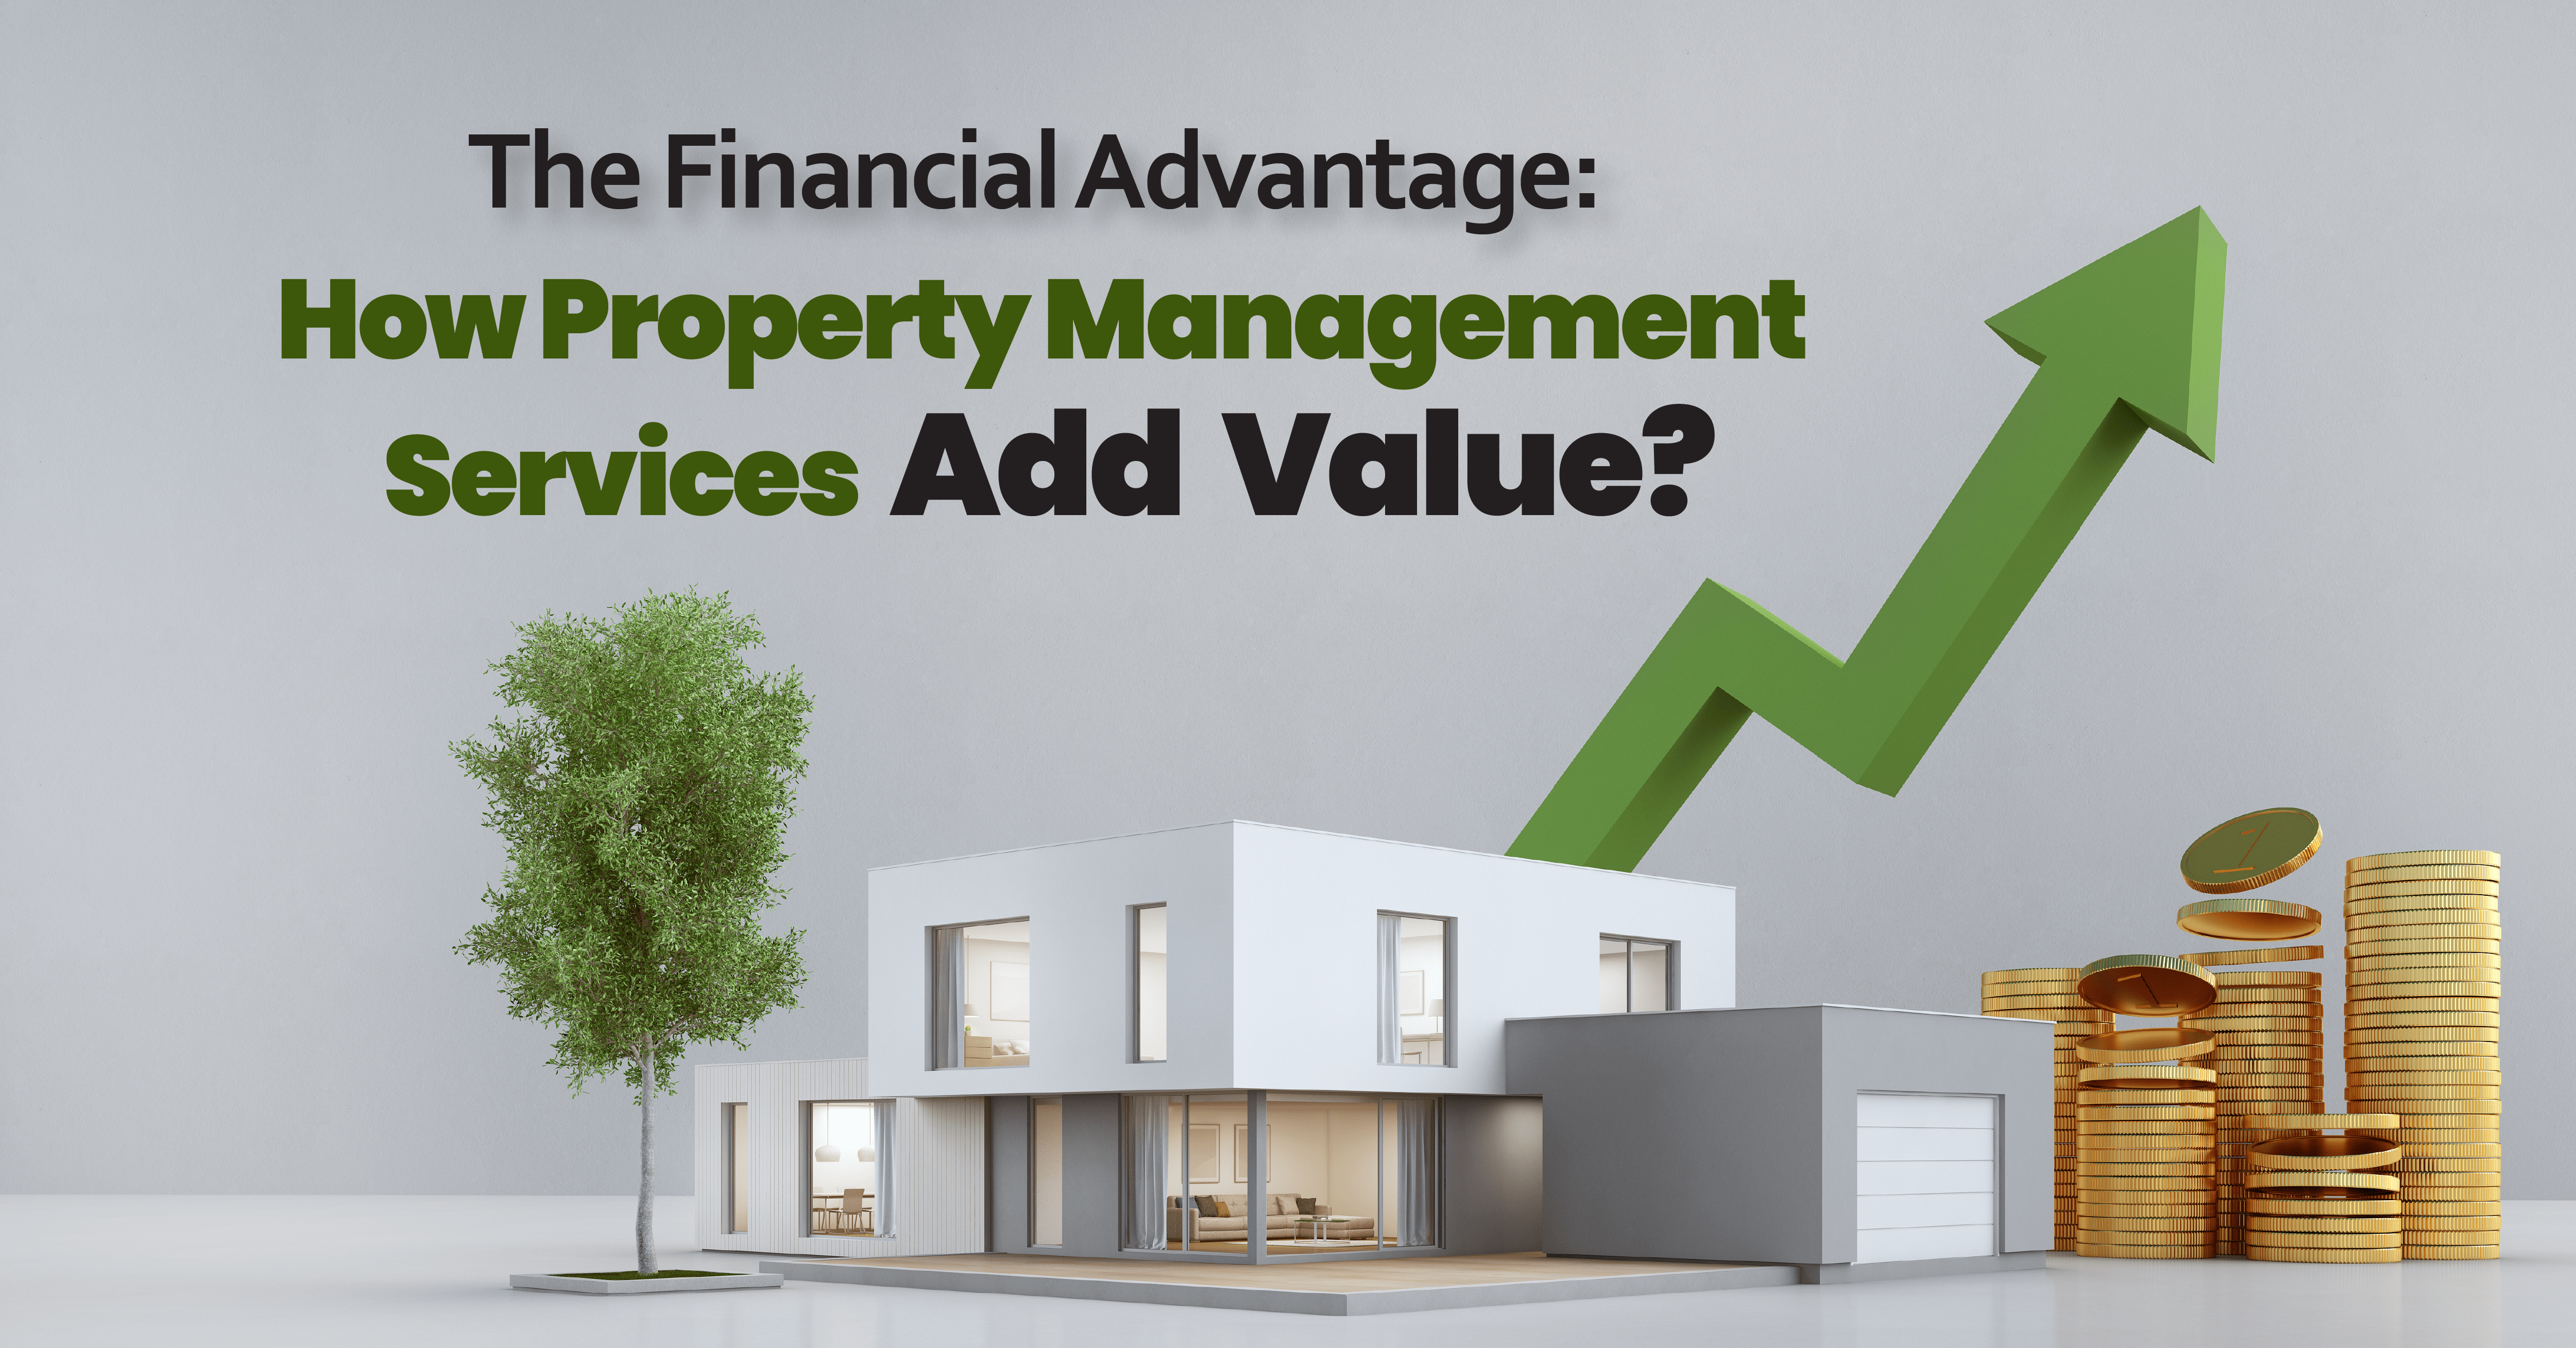 The Financial Advantage: How Property Management Services Add Value?